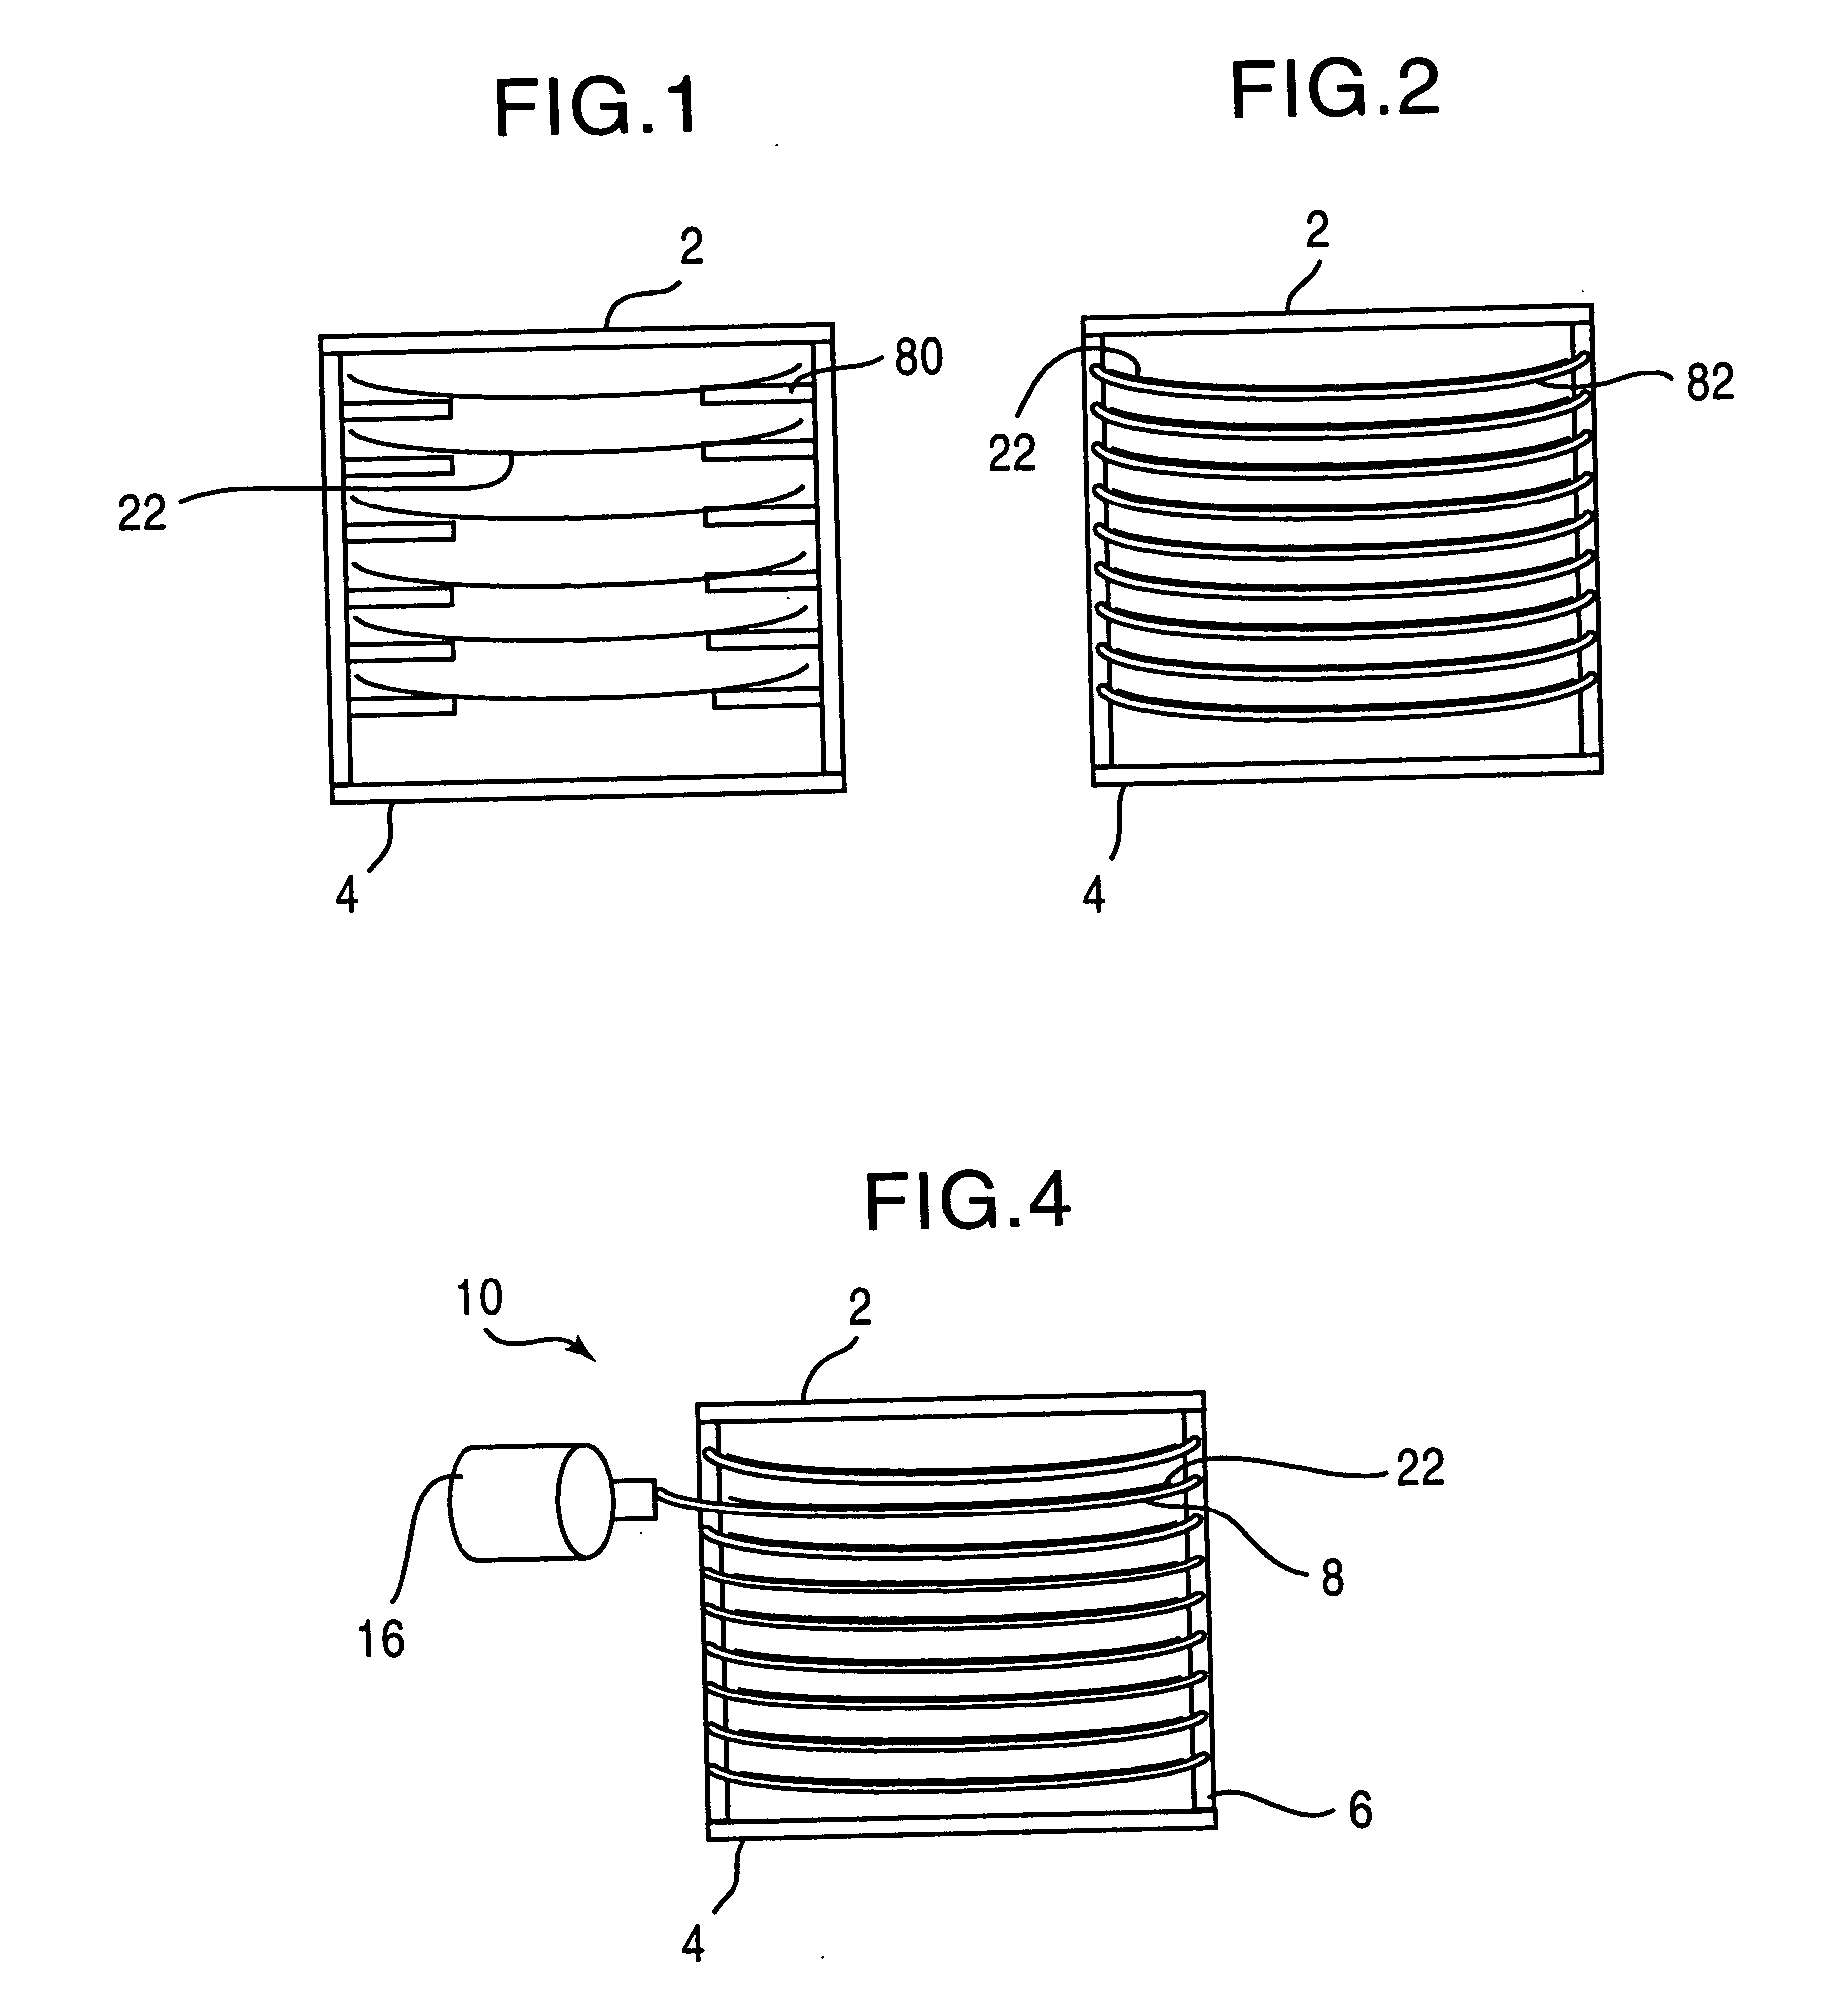 Substrate transportation device (wire)